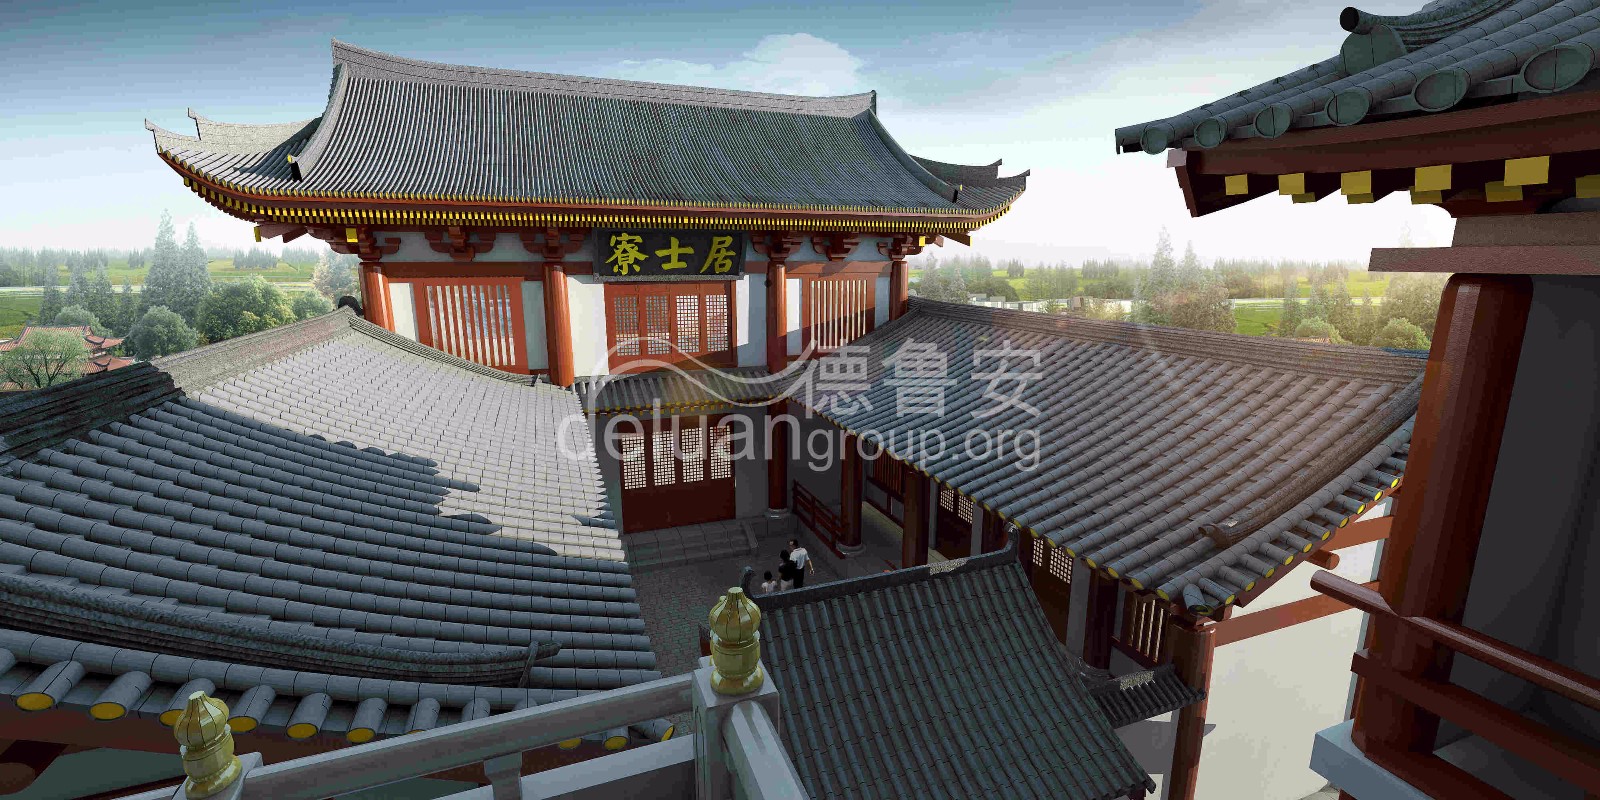 Planning and design of Baoqing temple in Xianghe0(图23)